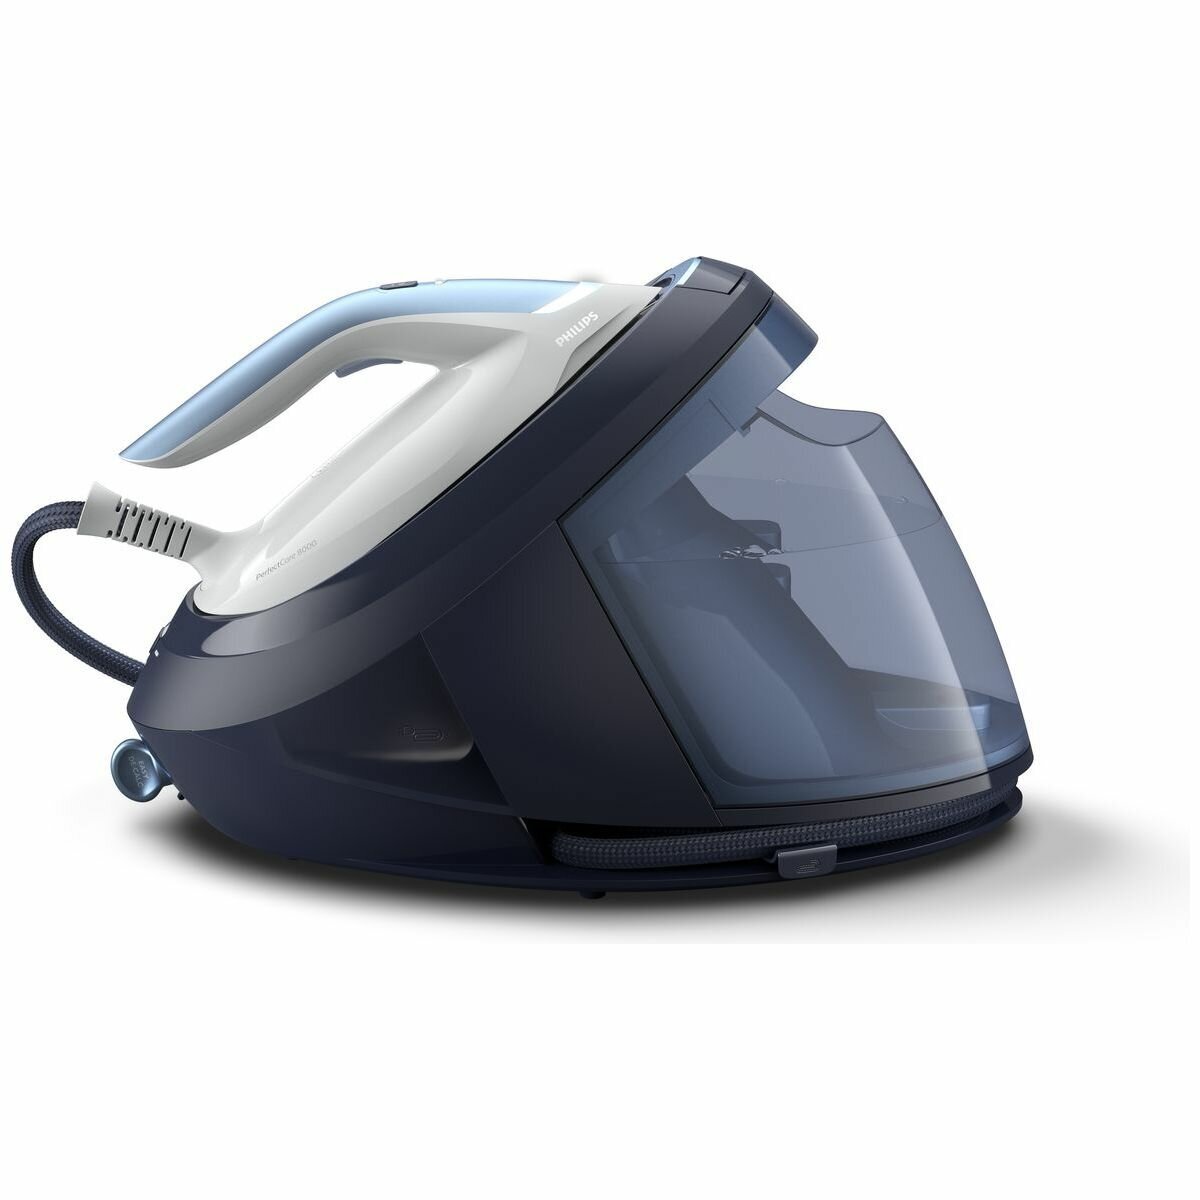 Philips Perfectcare Elite Iron Review - ET Speaks From Home